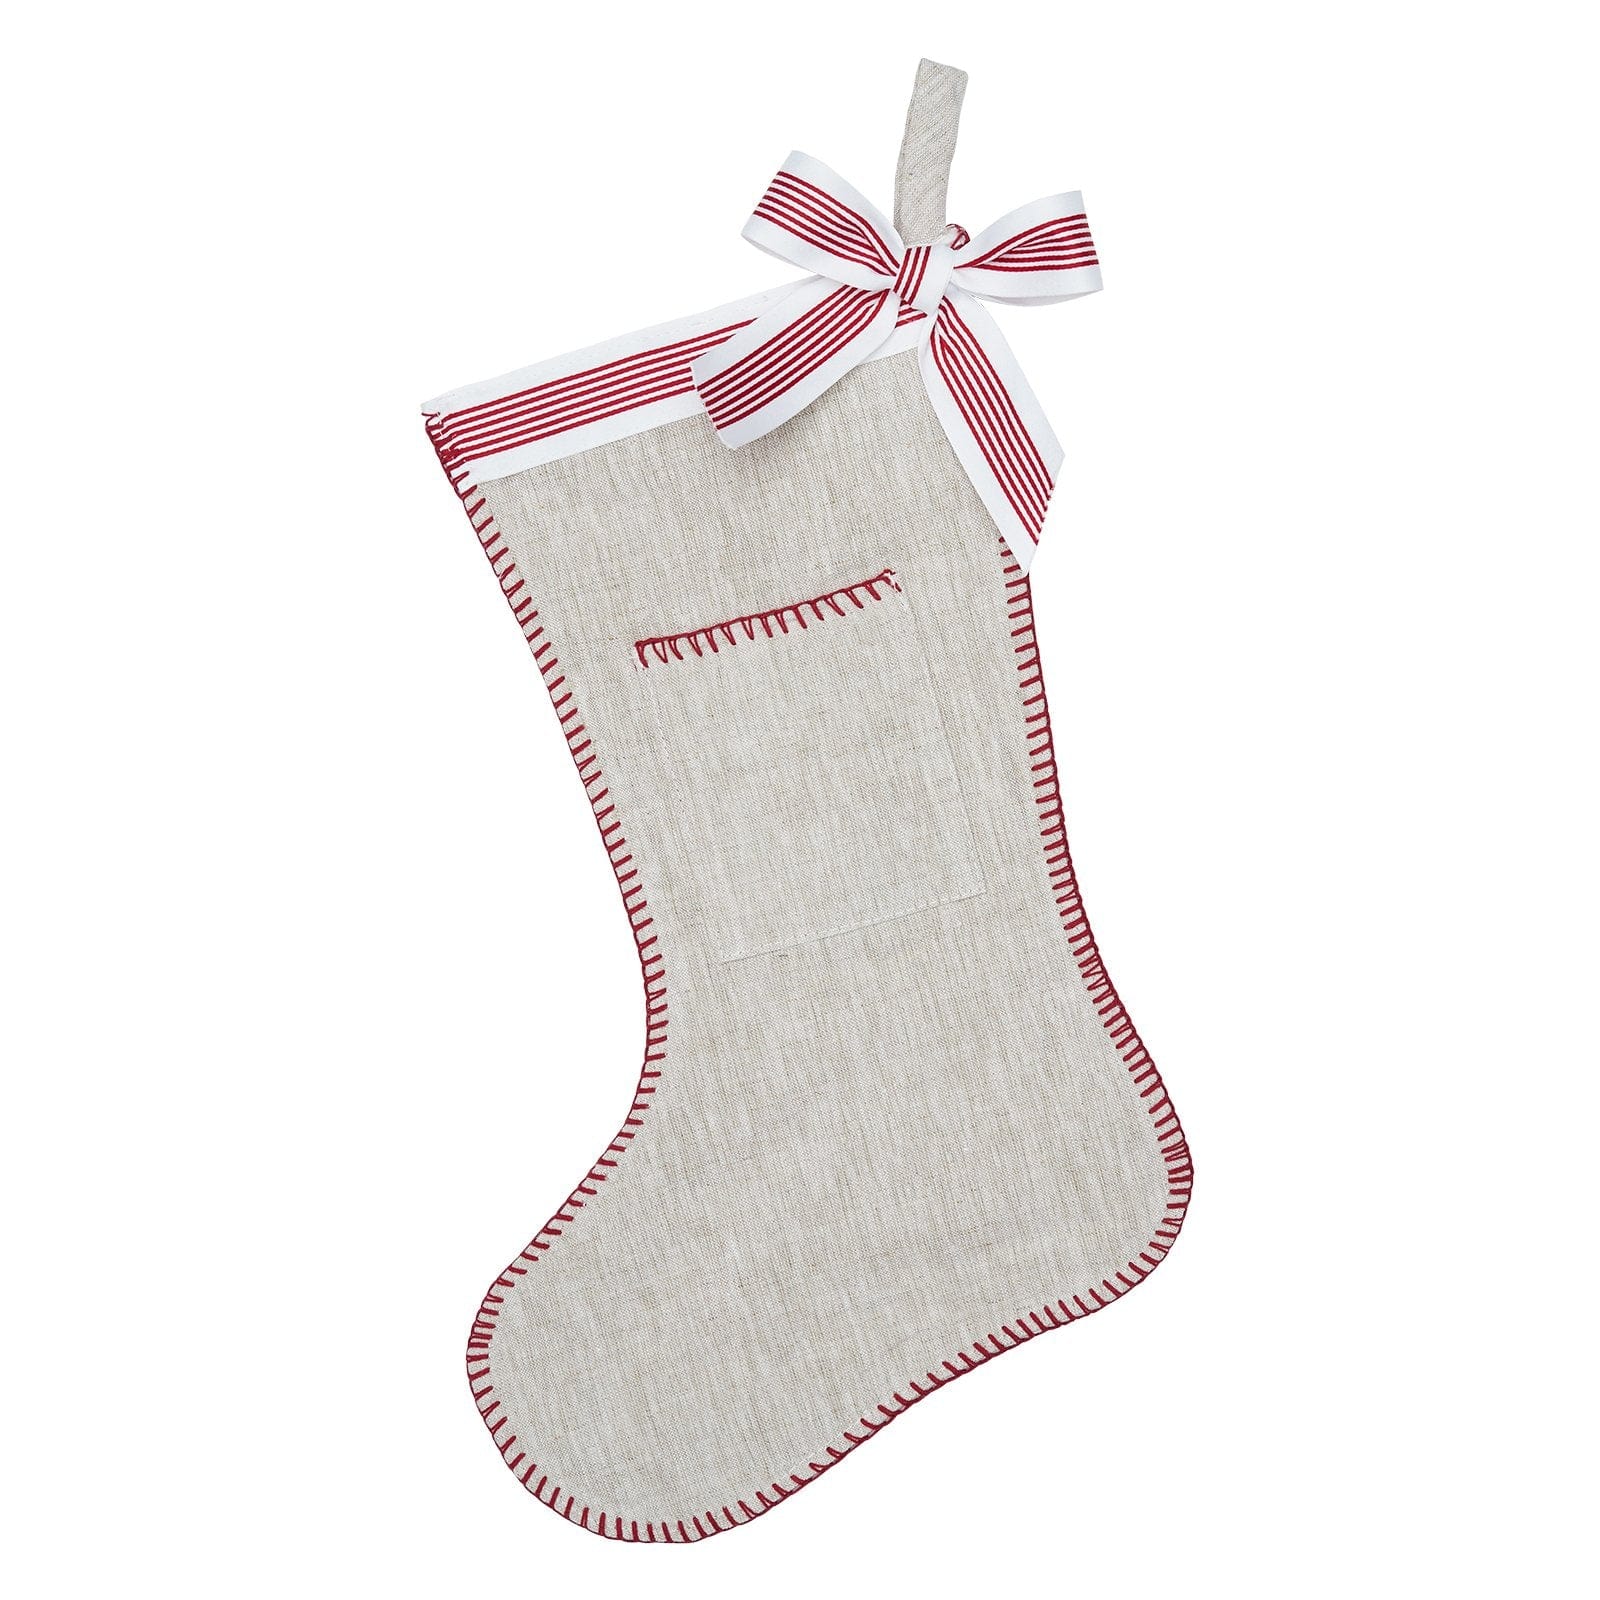 Linen and Red Bow Stocking Gartner Studios Holiday Stockings 45415